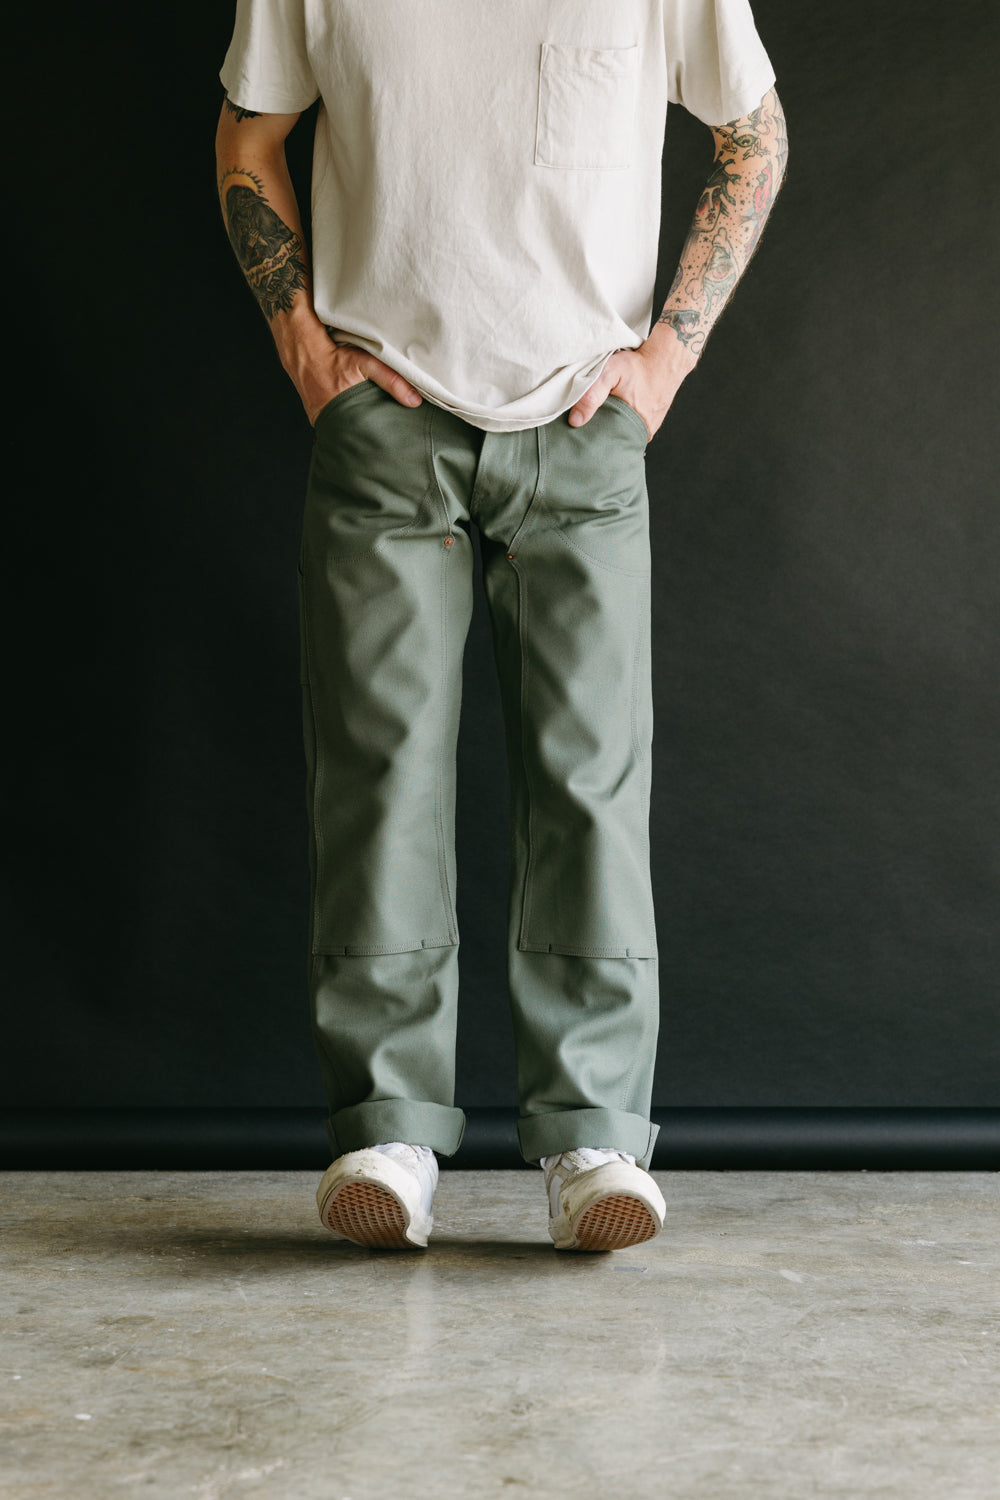 13oz - Wendell Smithson | - M*A*S*H Double Pant Dant James Canvas Knee